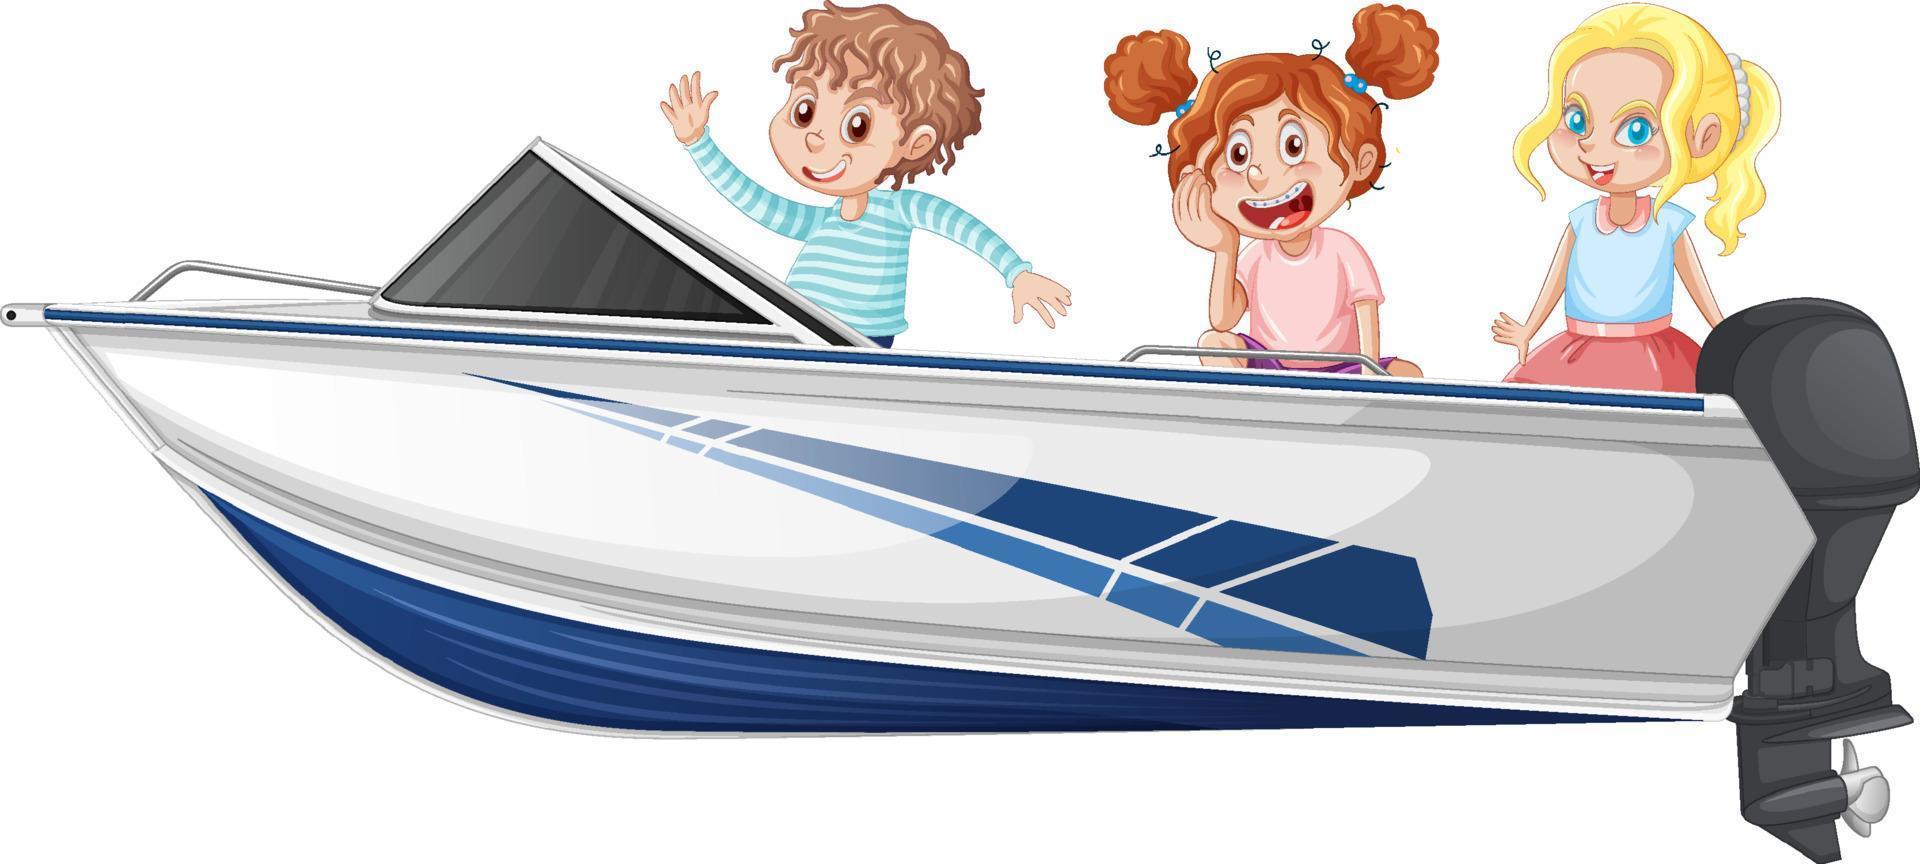 Christmas Boy and girl standing on a boat on a white background vector